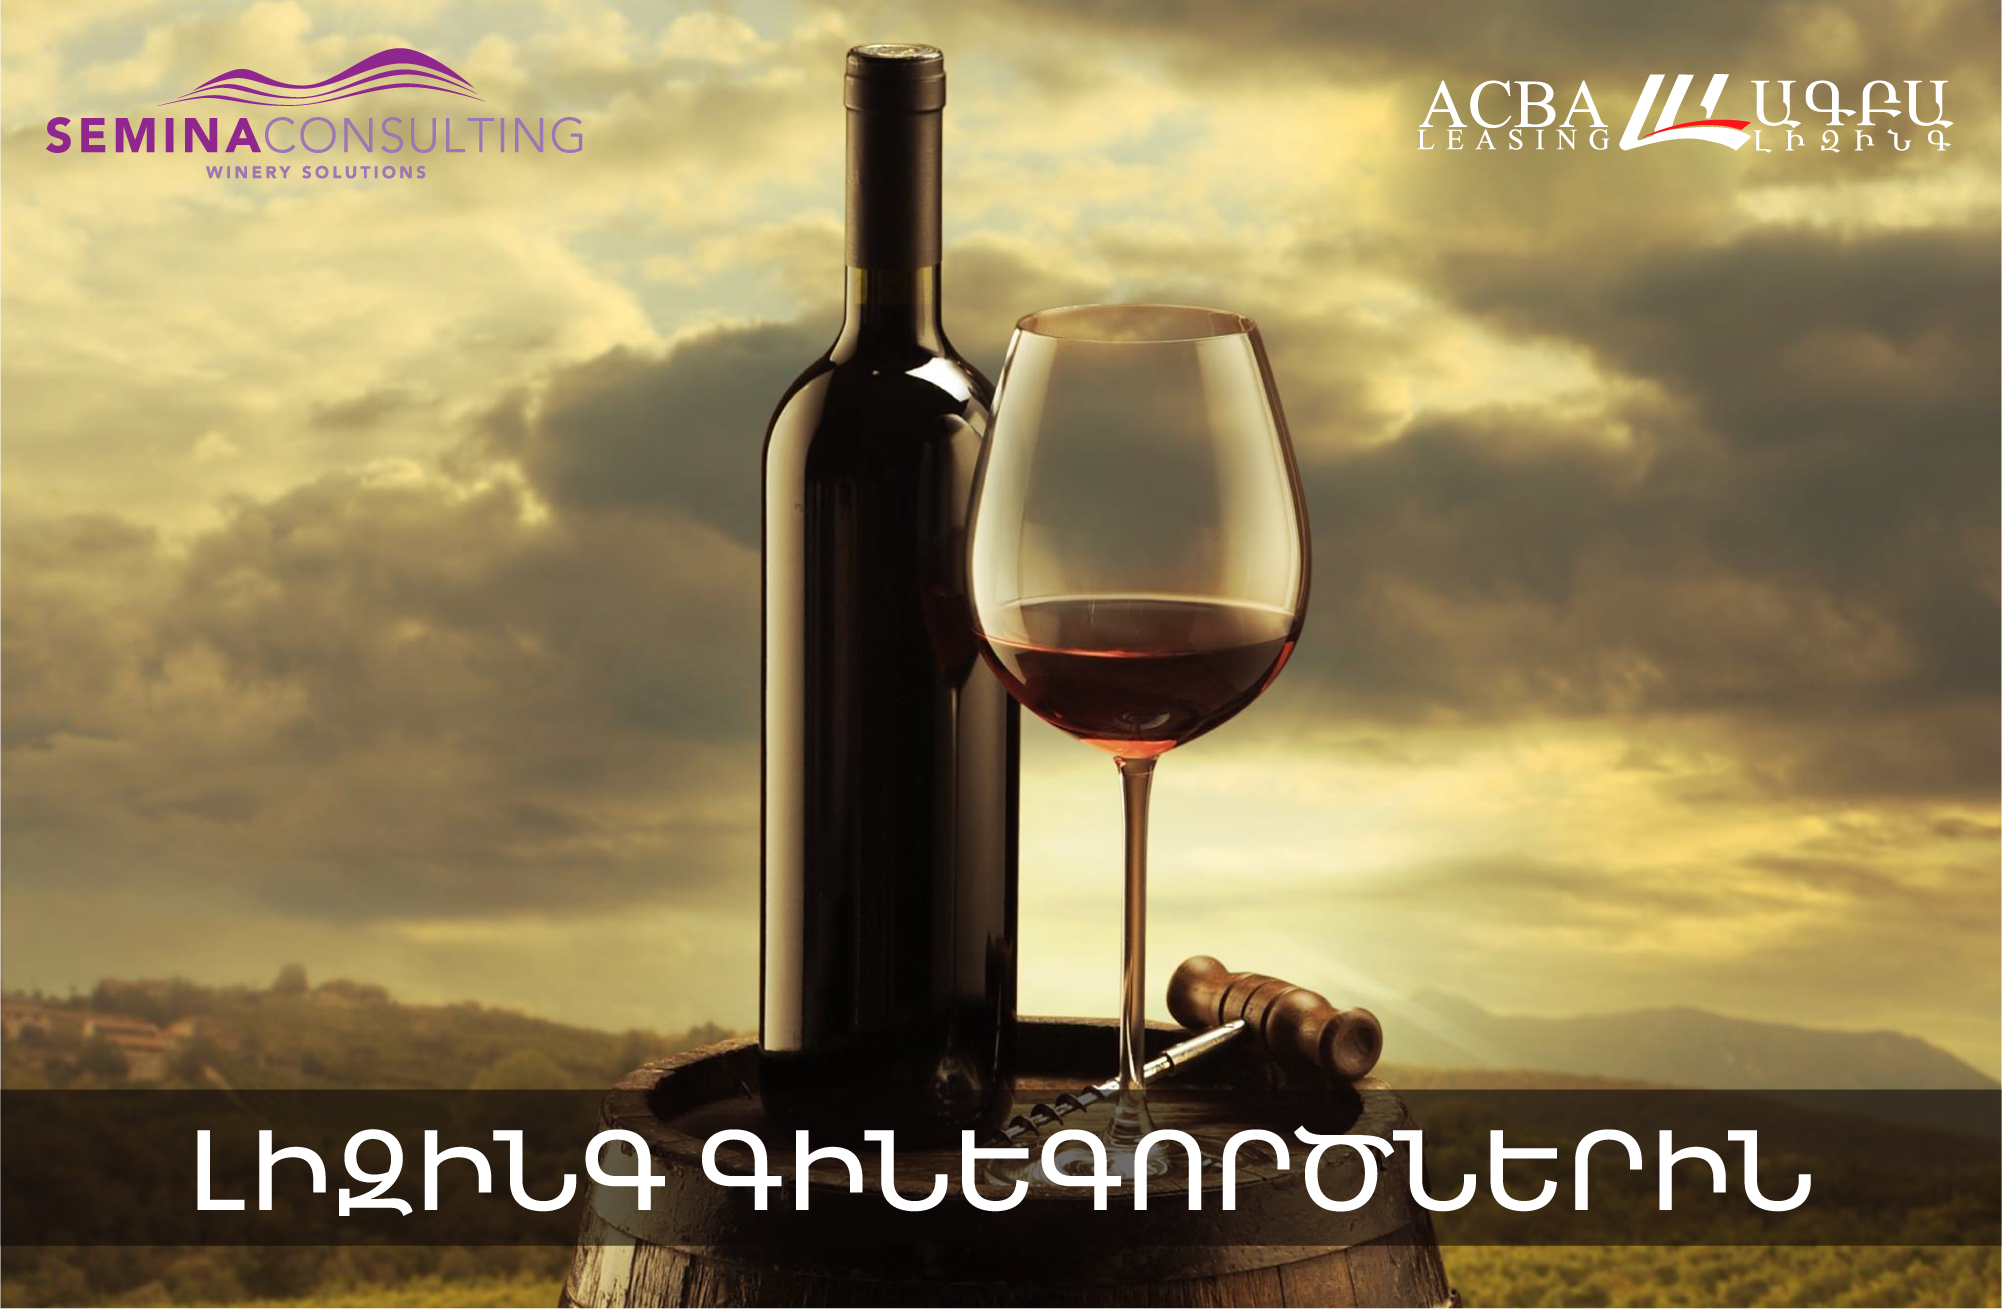 Companies of ACBA Leasing  and Semina Consulting set  favorable  conditions for winemakers